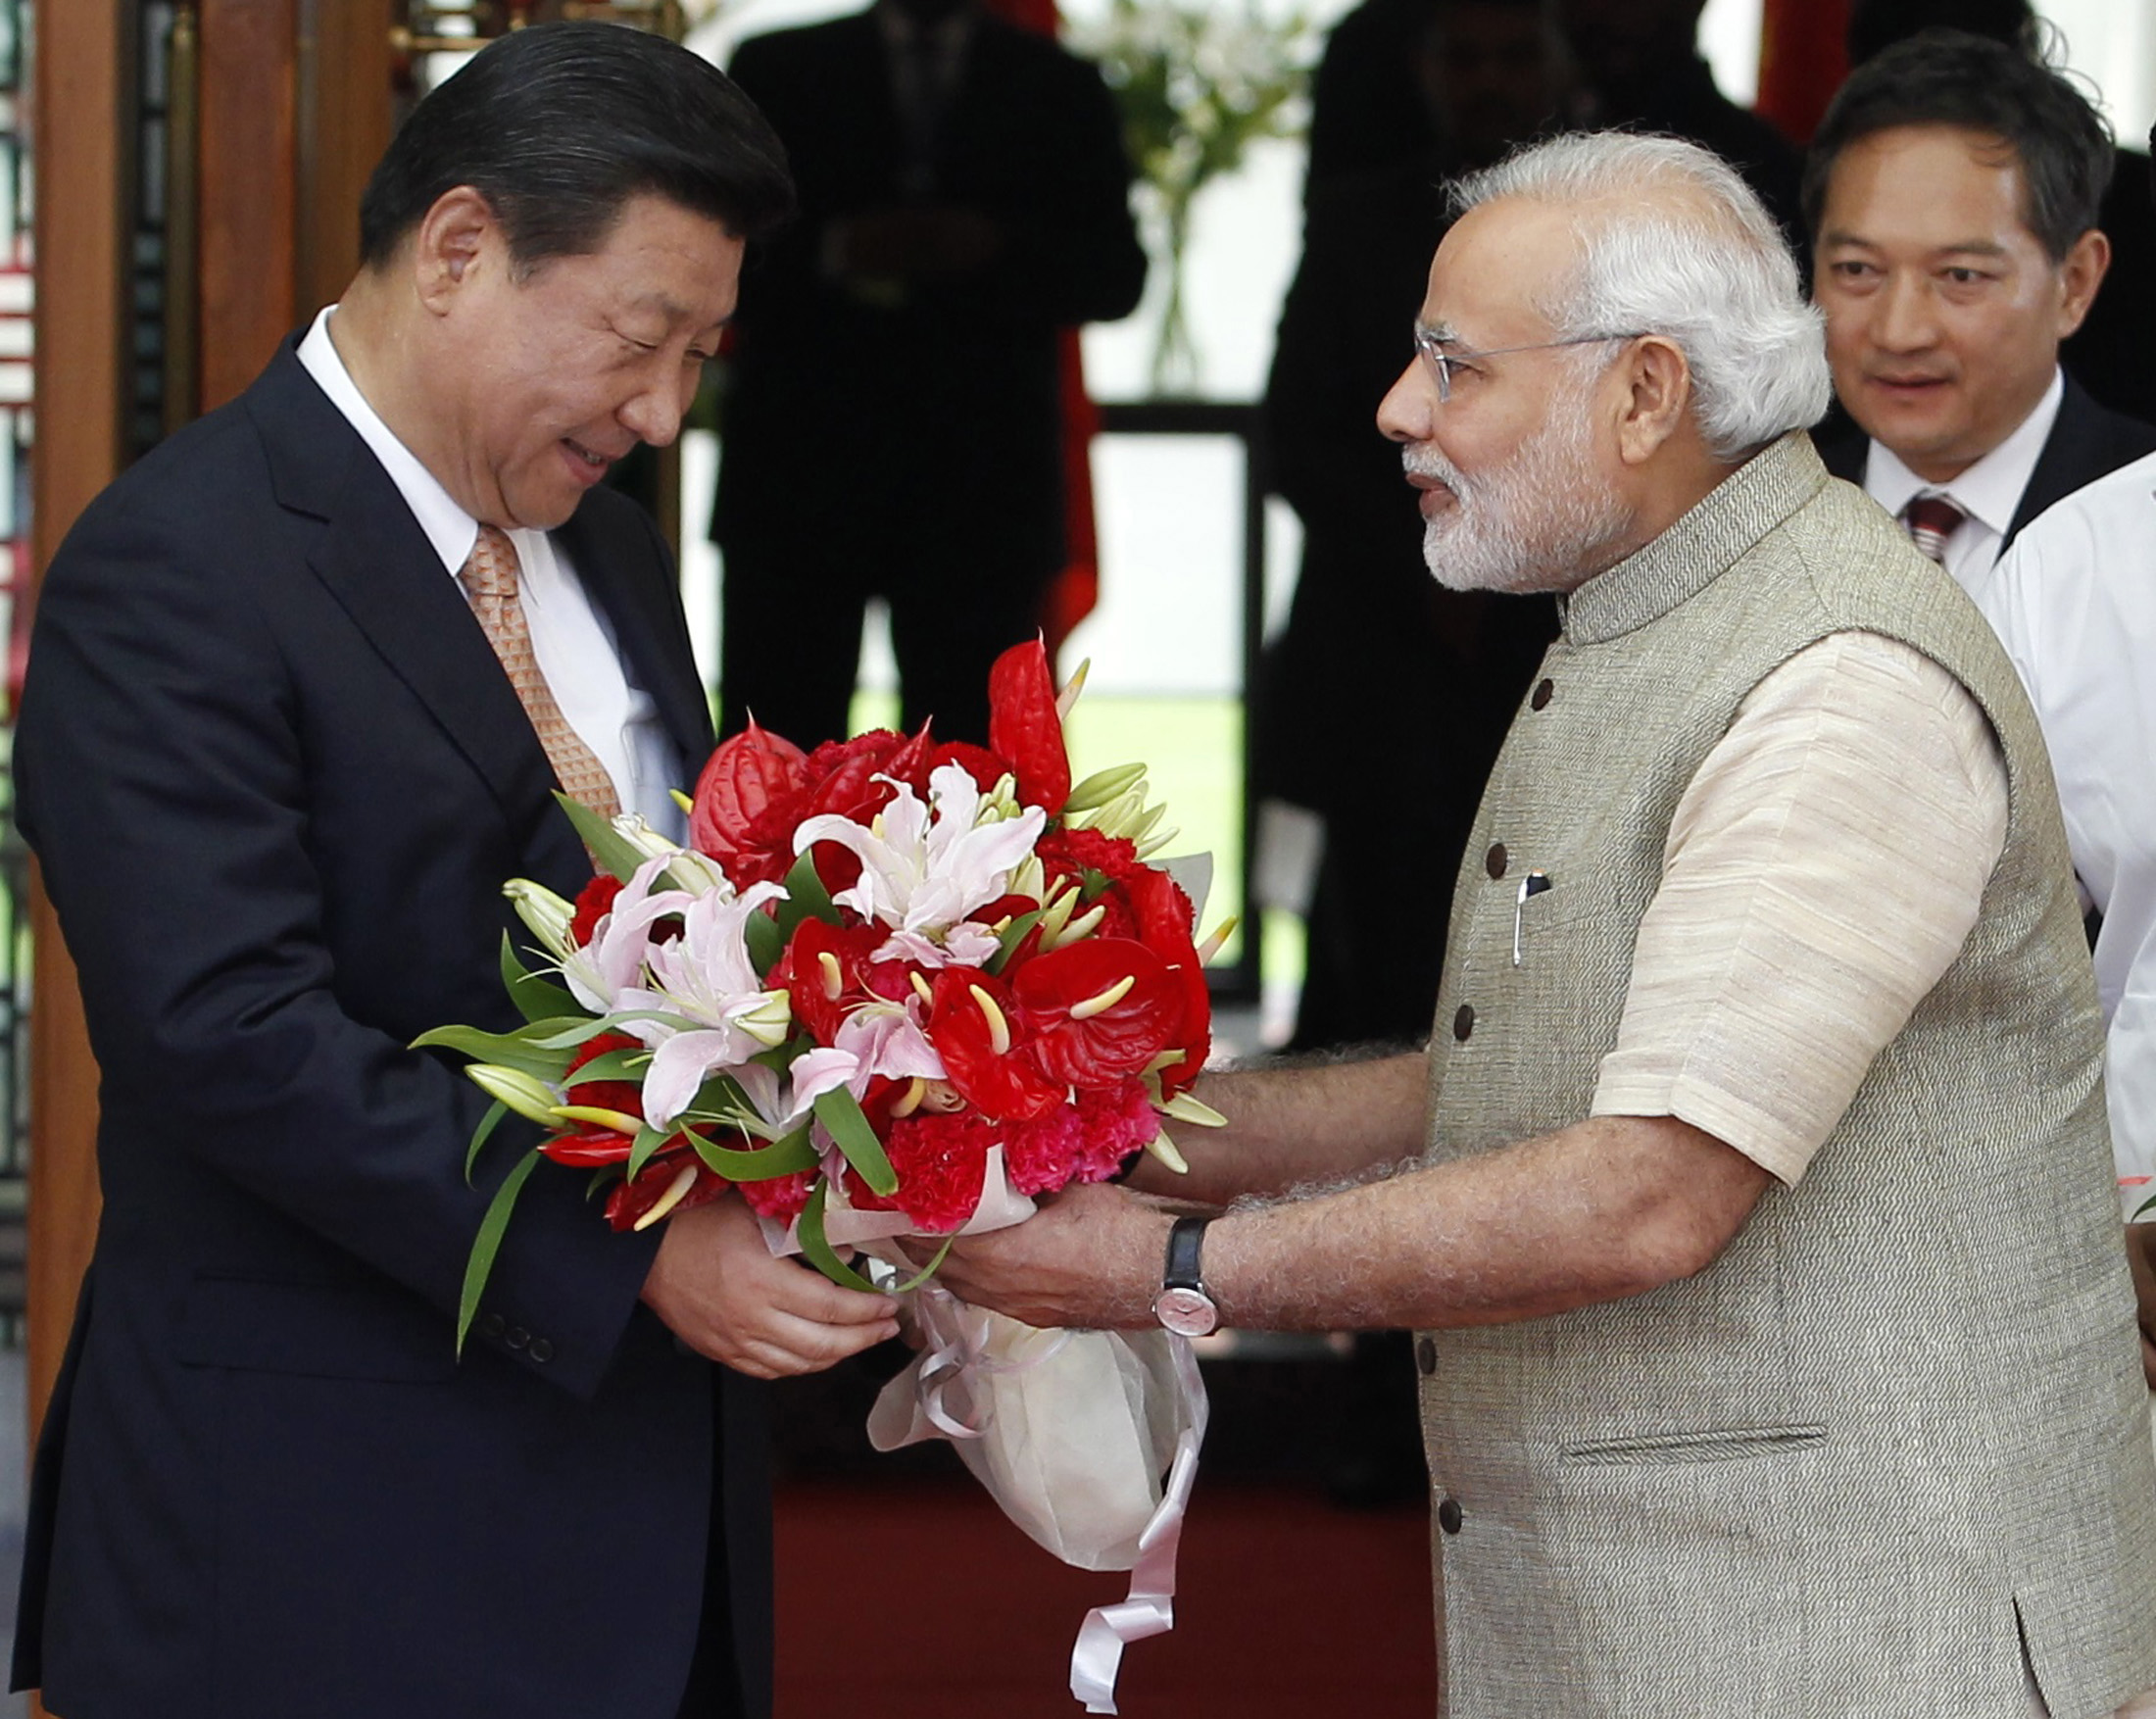 India's Prime Minister Narendra Modi, right, presents a bouquet to China's President Xi Jinping before their meeting in the western Indian city of Ahmedabad on Sept. 17, 2014 (Amit Dave—Reuters)